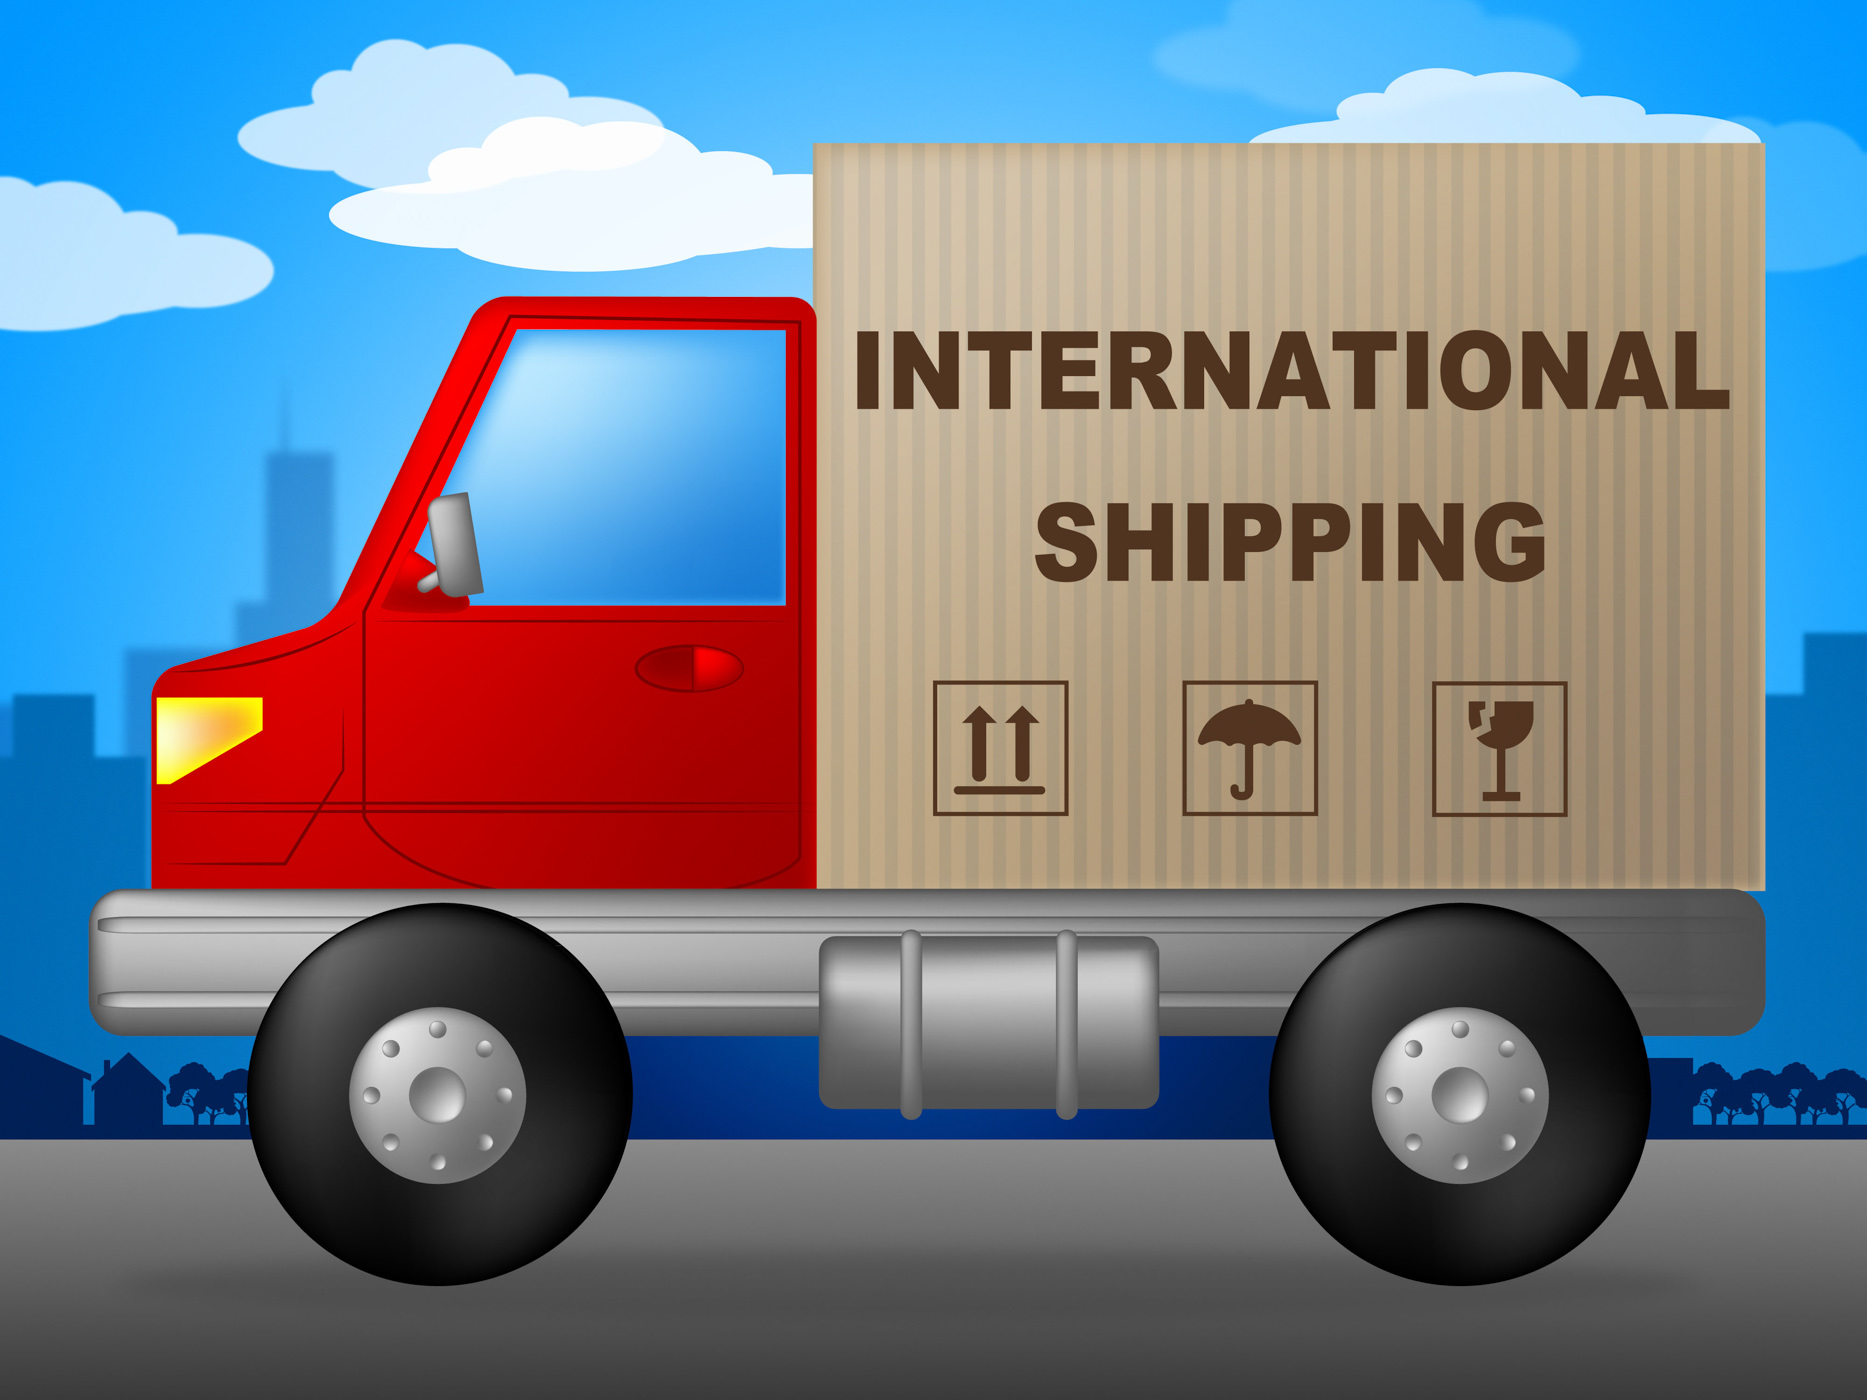 International shipping indicates across the globe and countries photo